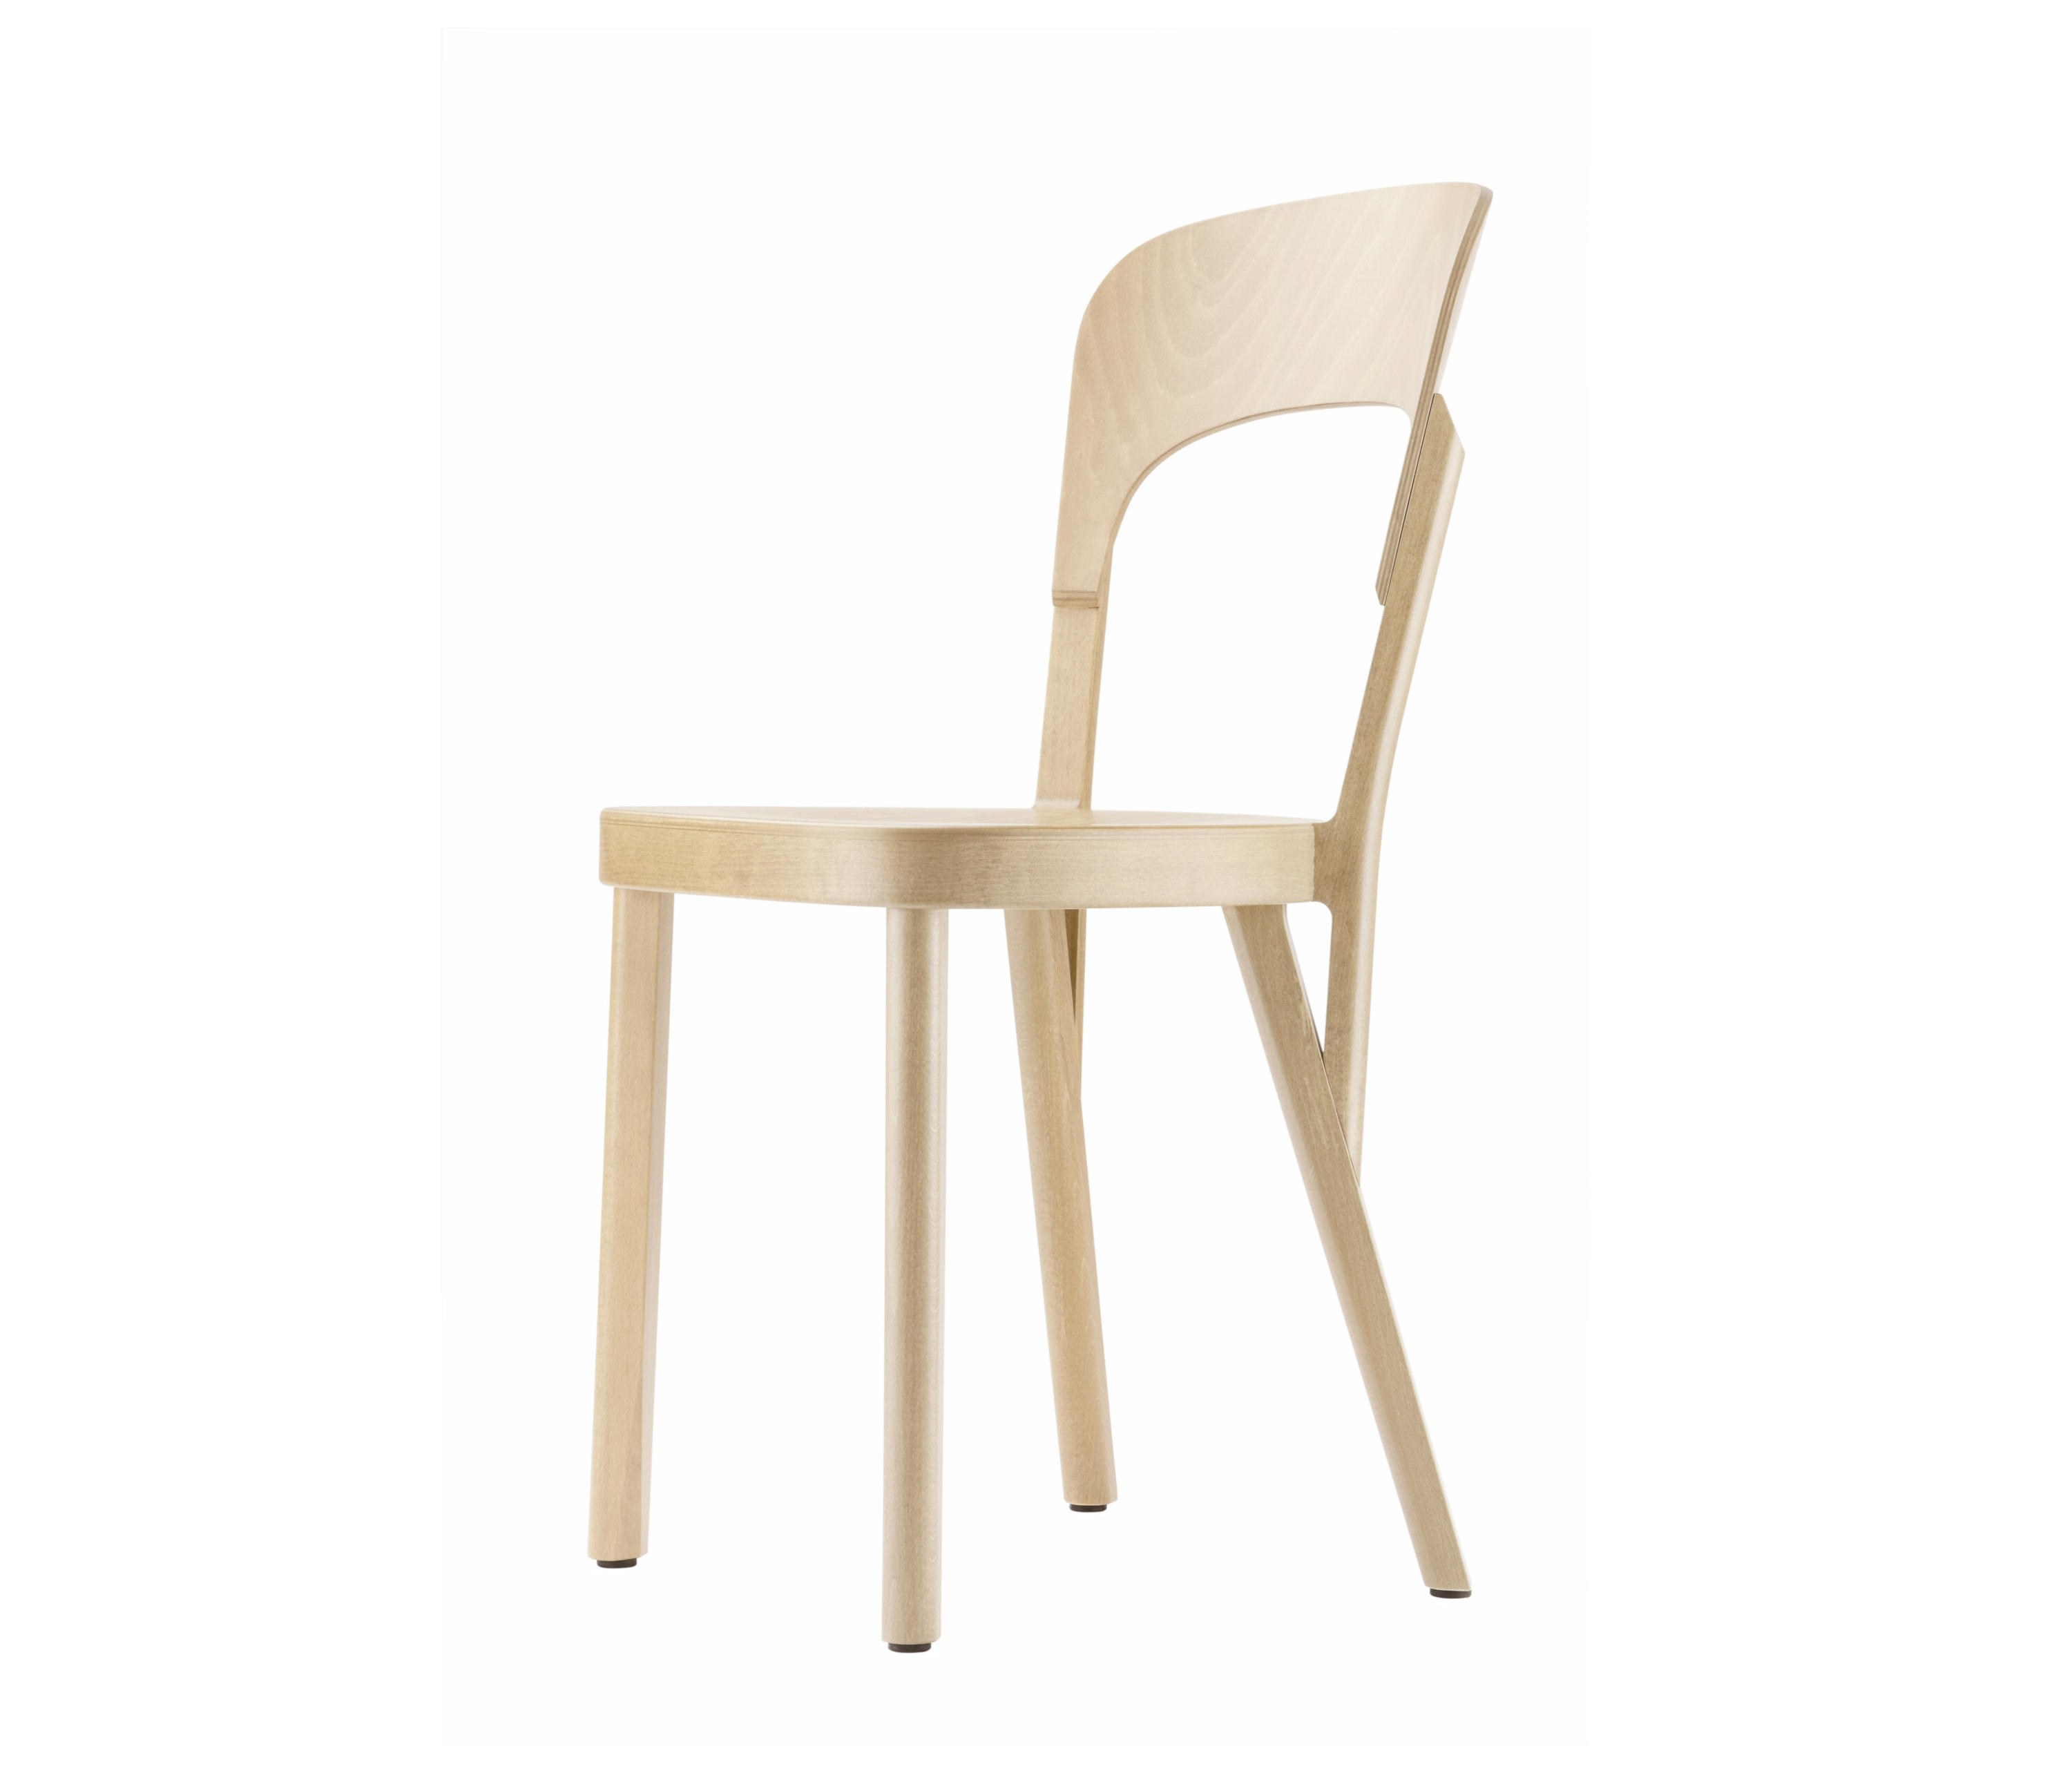 107 - Restaurant chairs from Thonet | Architonic